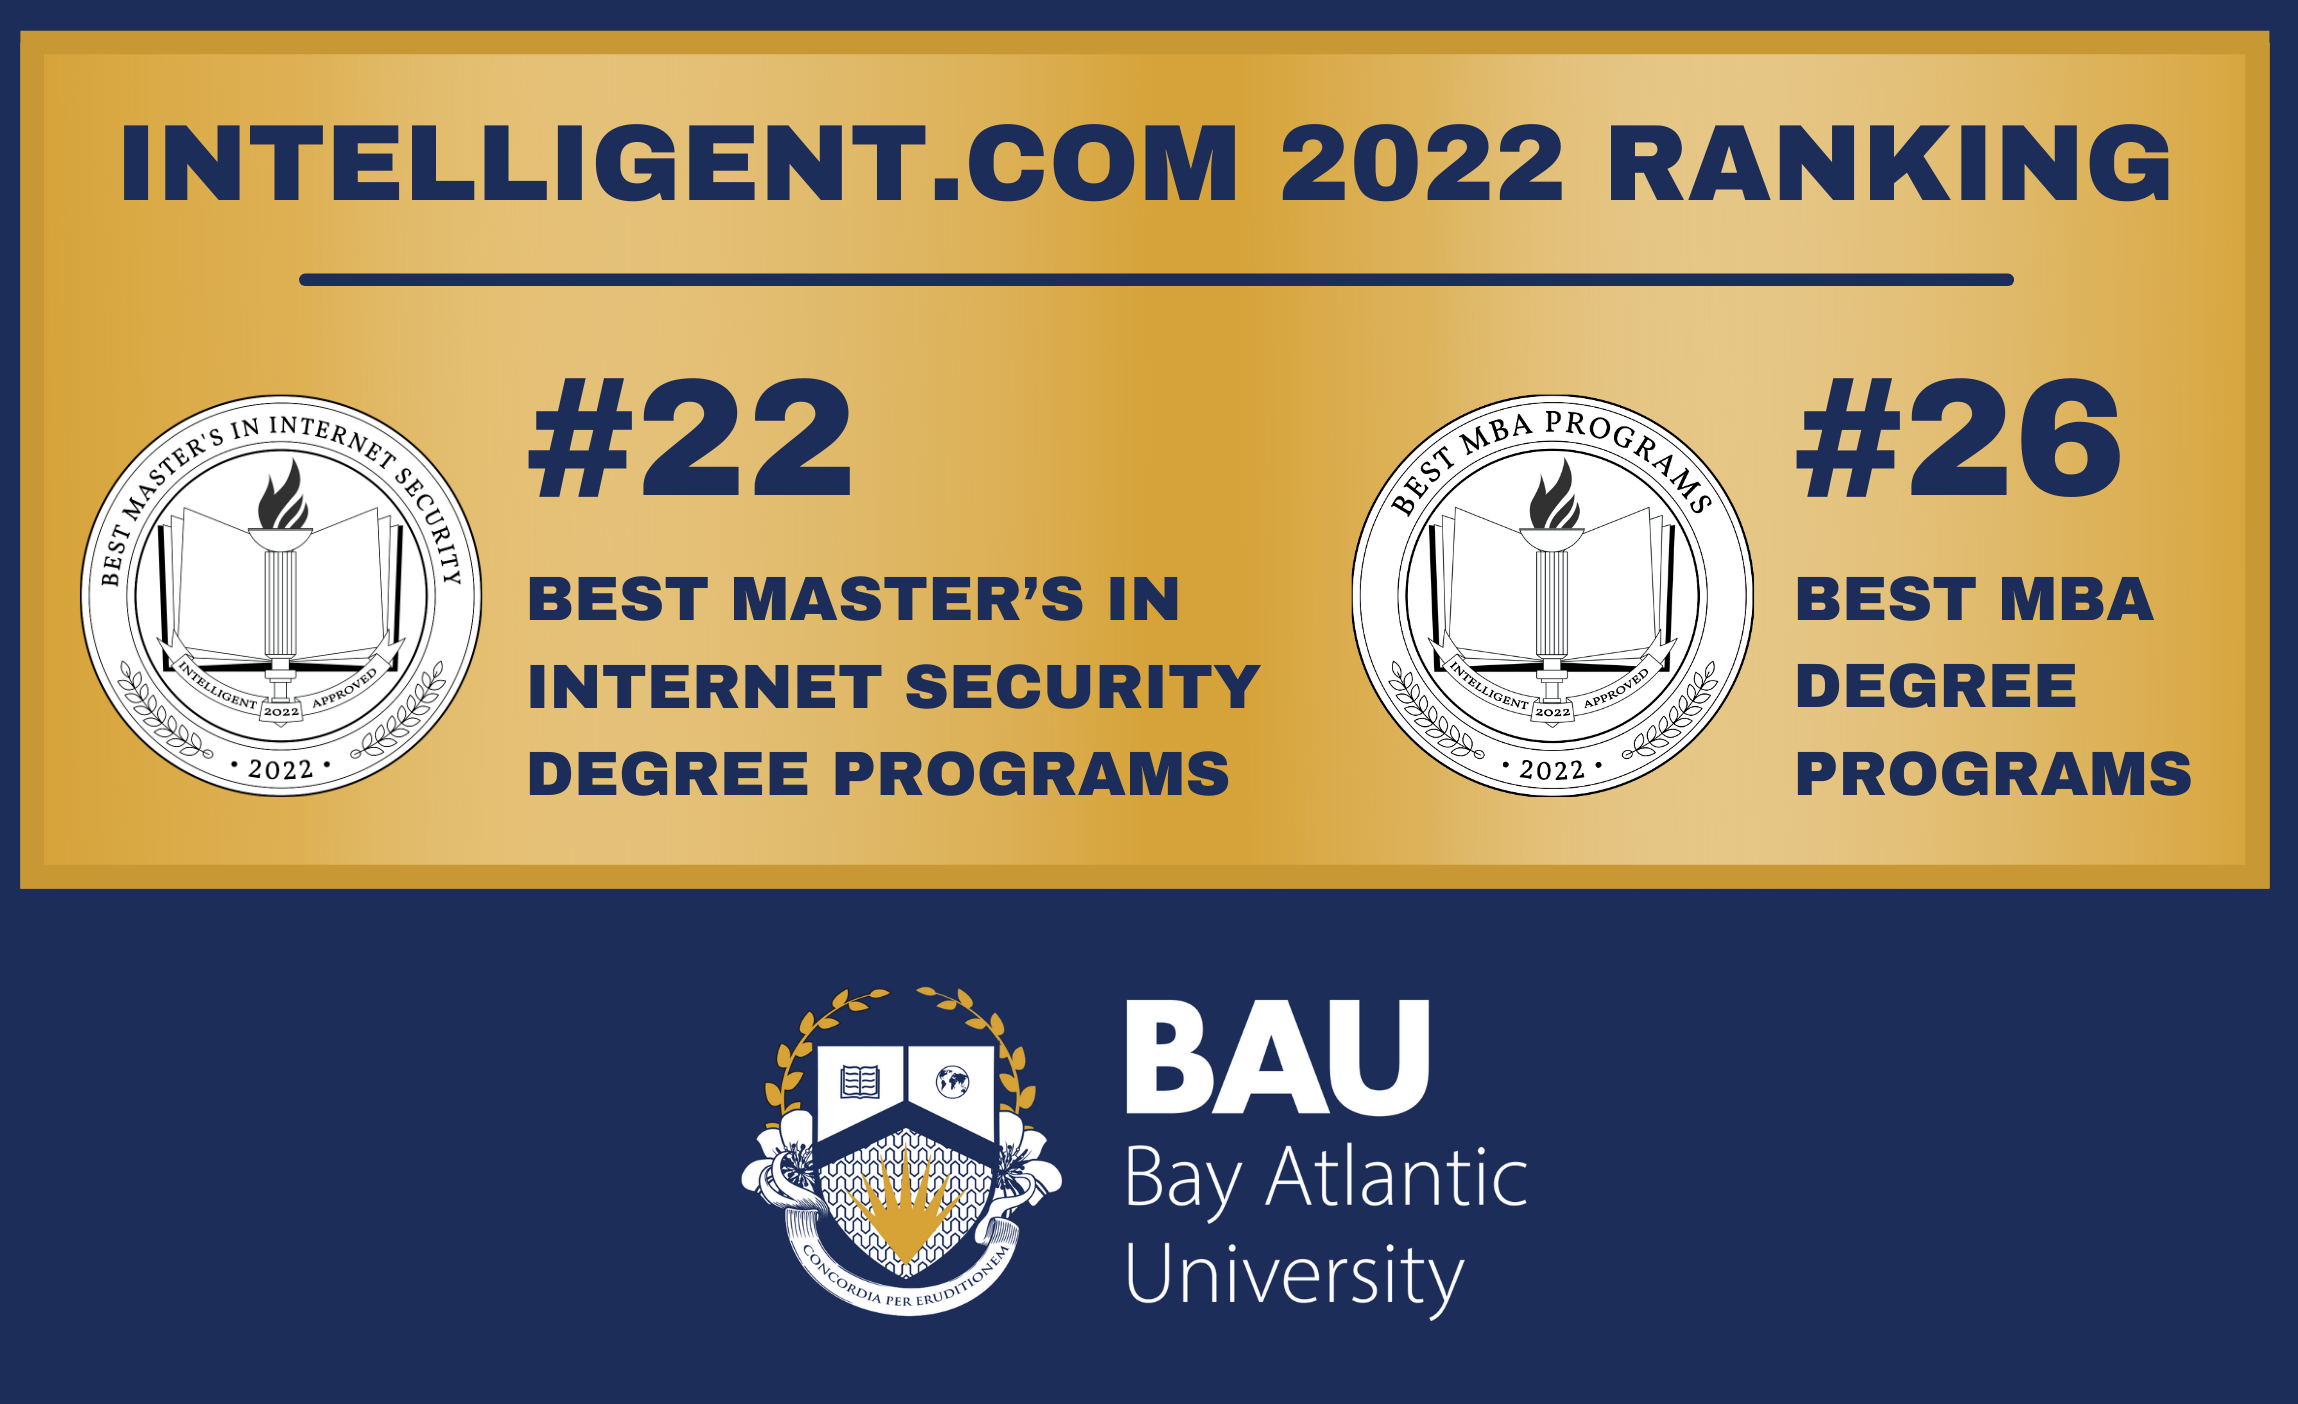 Cybersecurity and MBA Programs